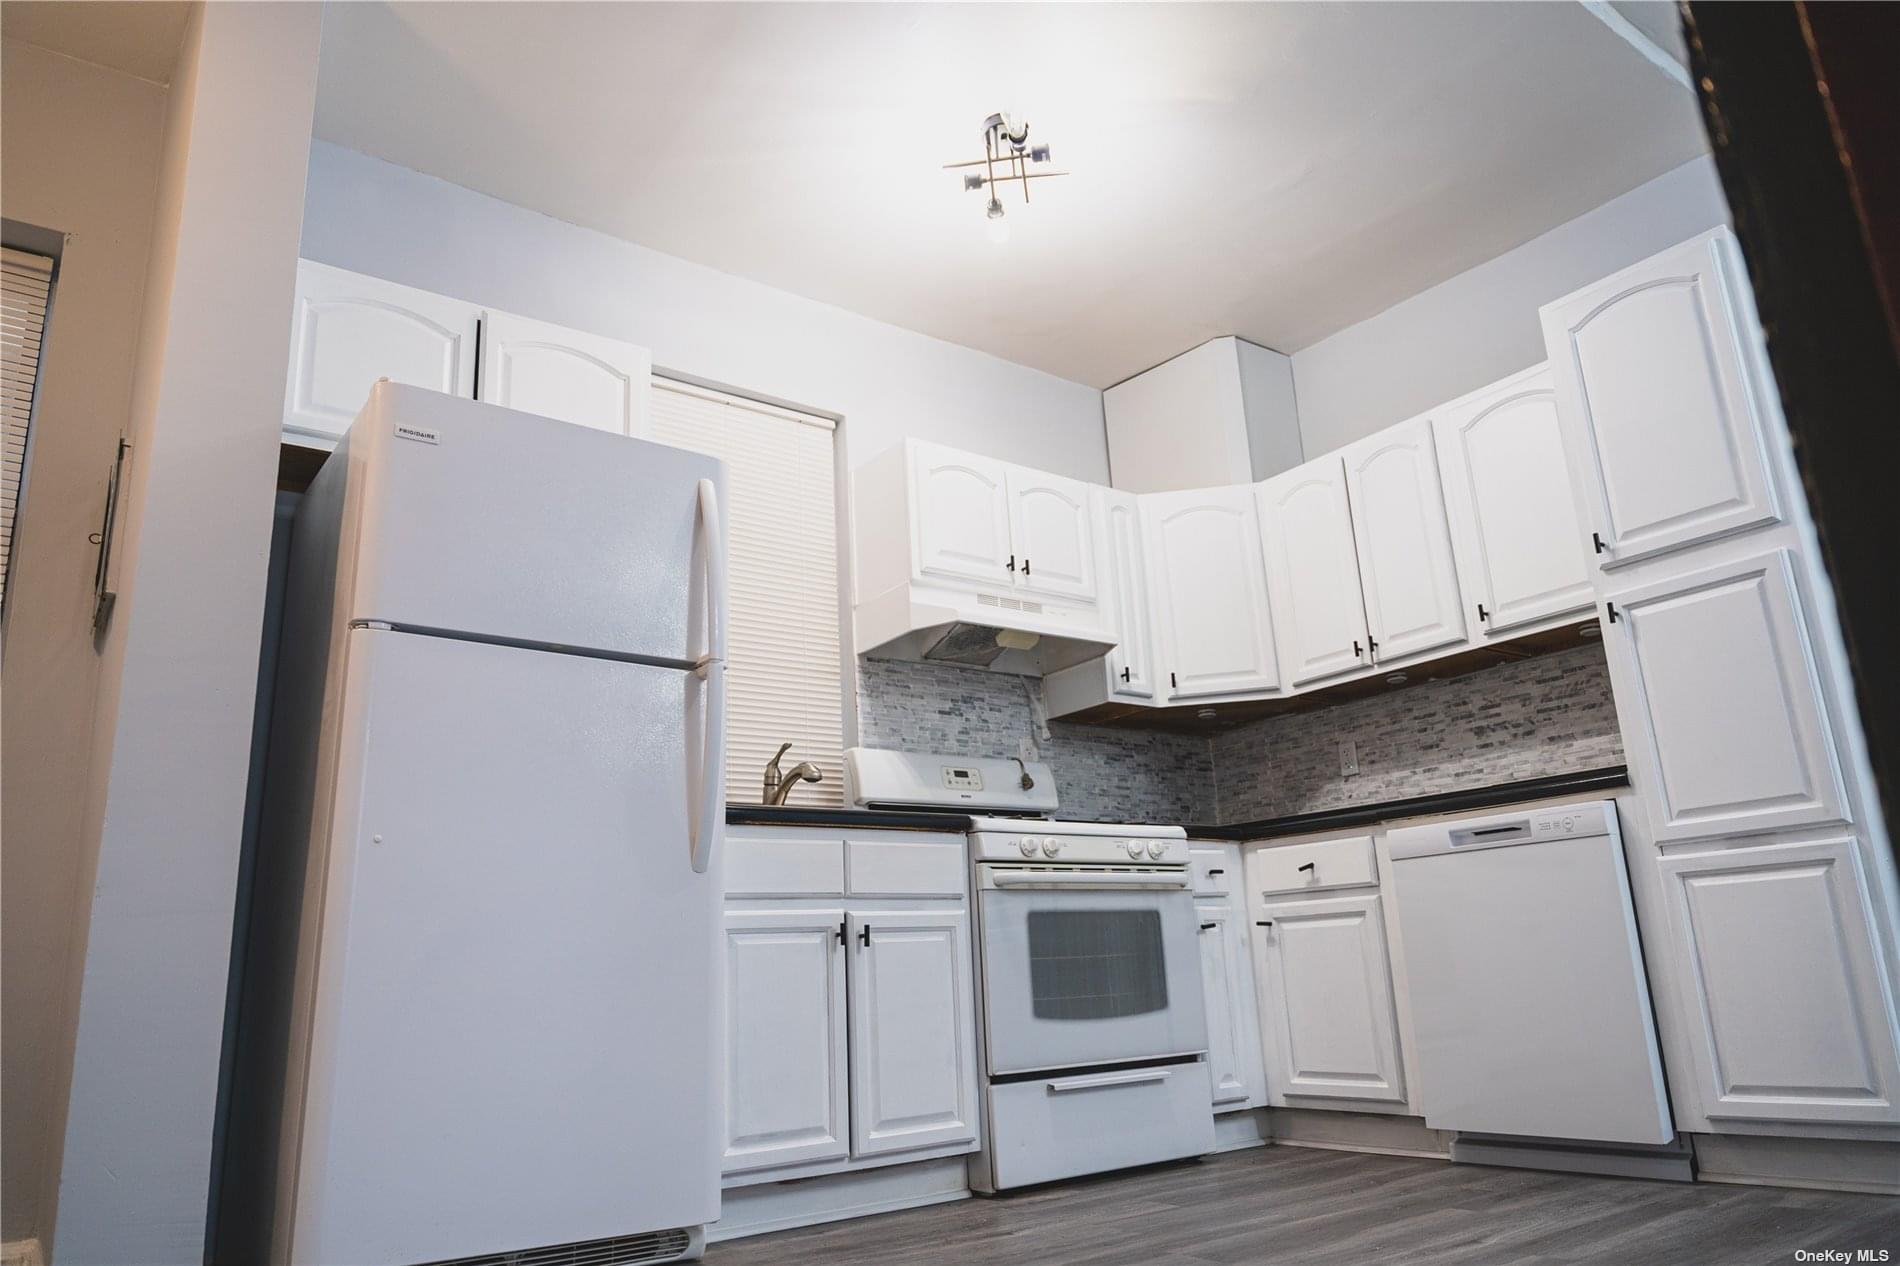 21-78 35th Street #1G in Queens, Astoria, NY 11106